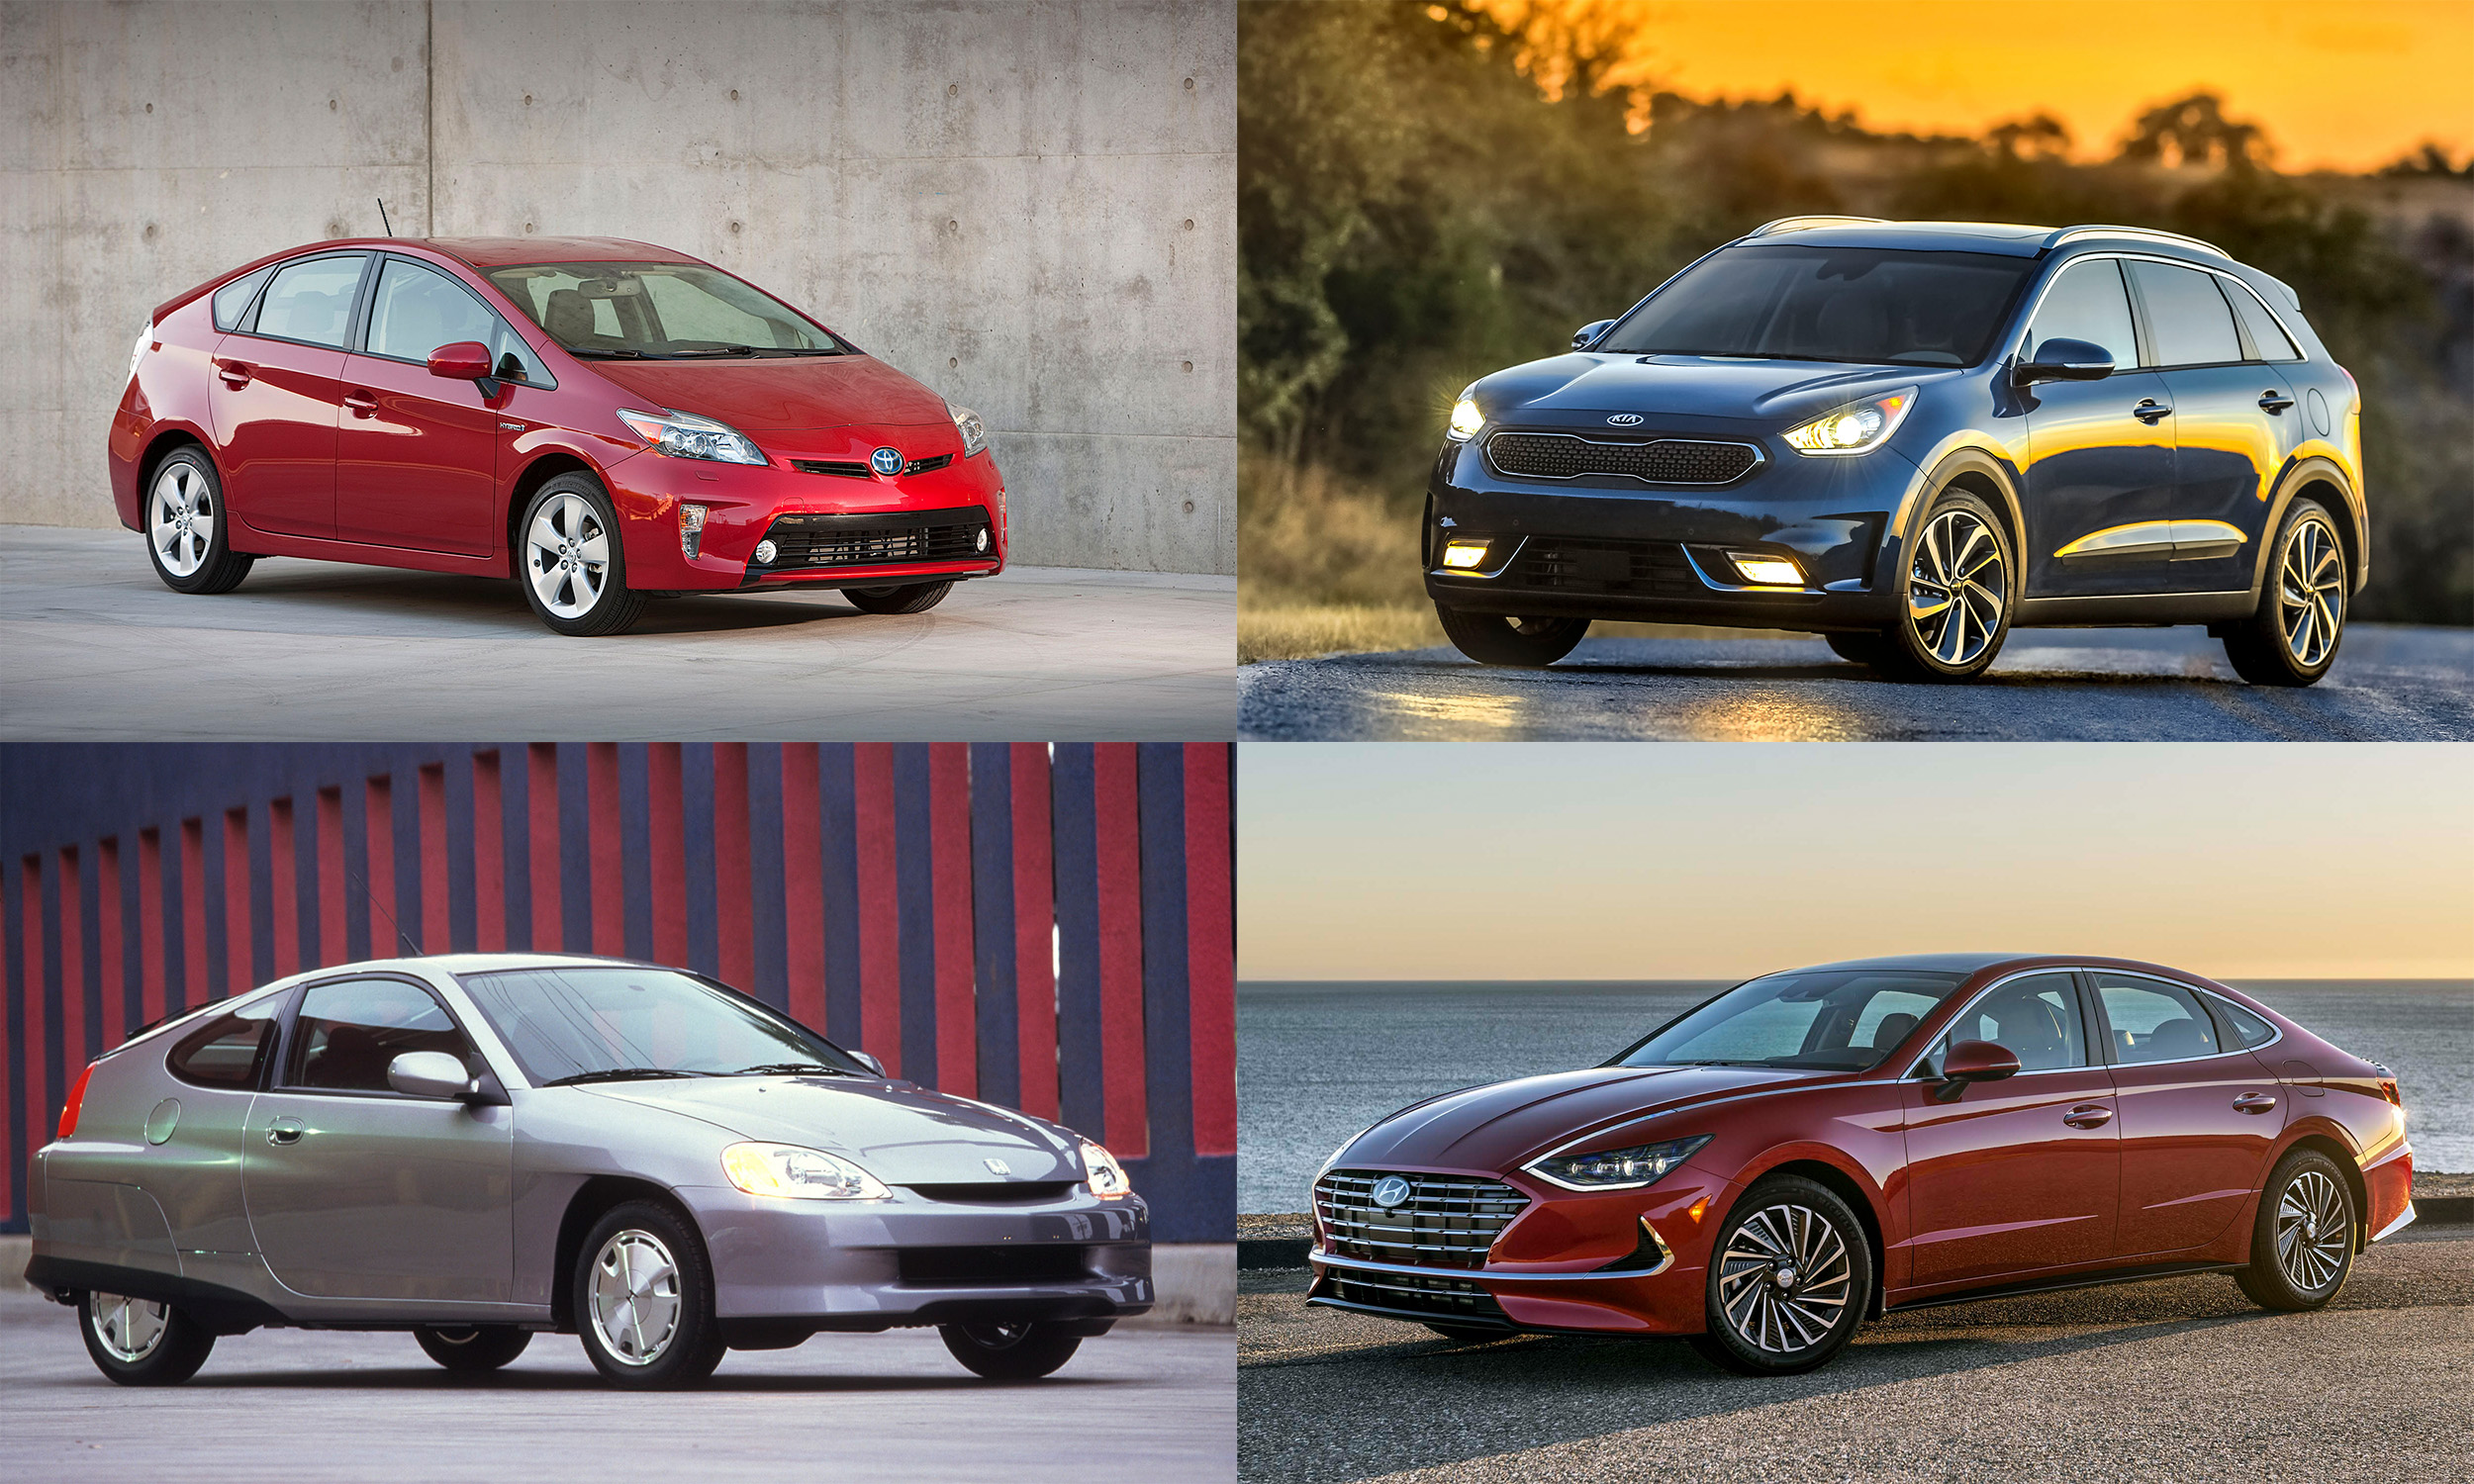 Most Fuel-Efficient Cars of the Past 30 Years